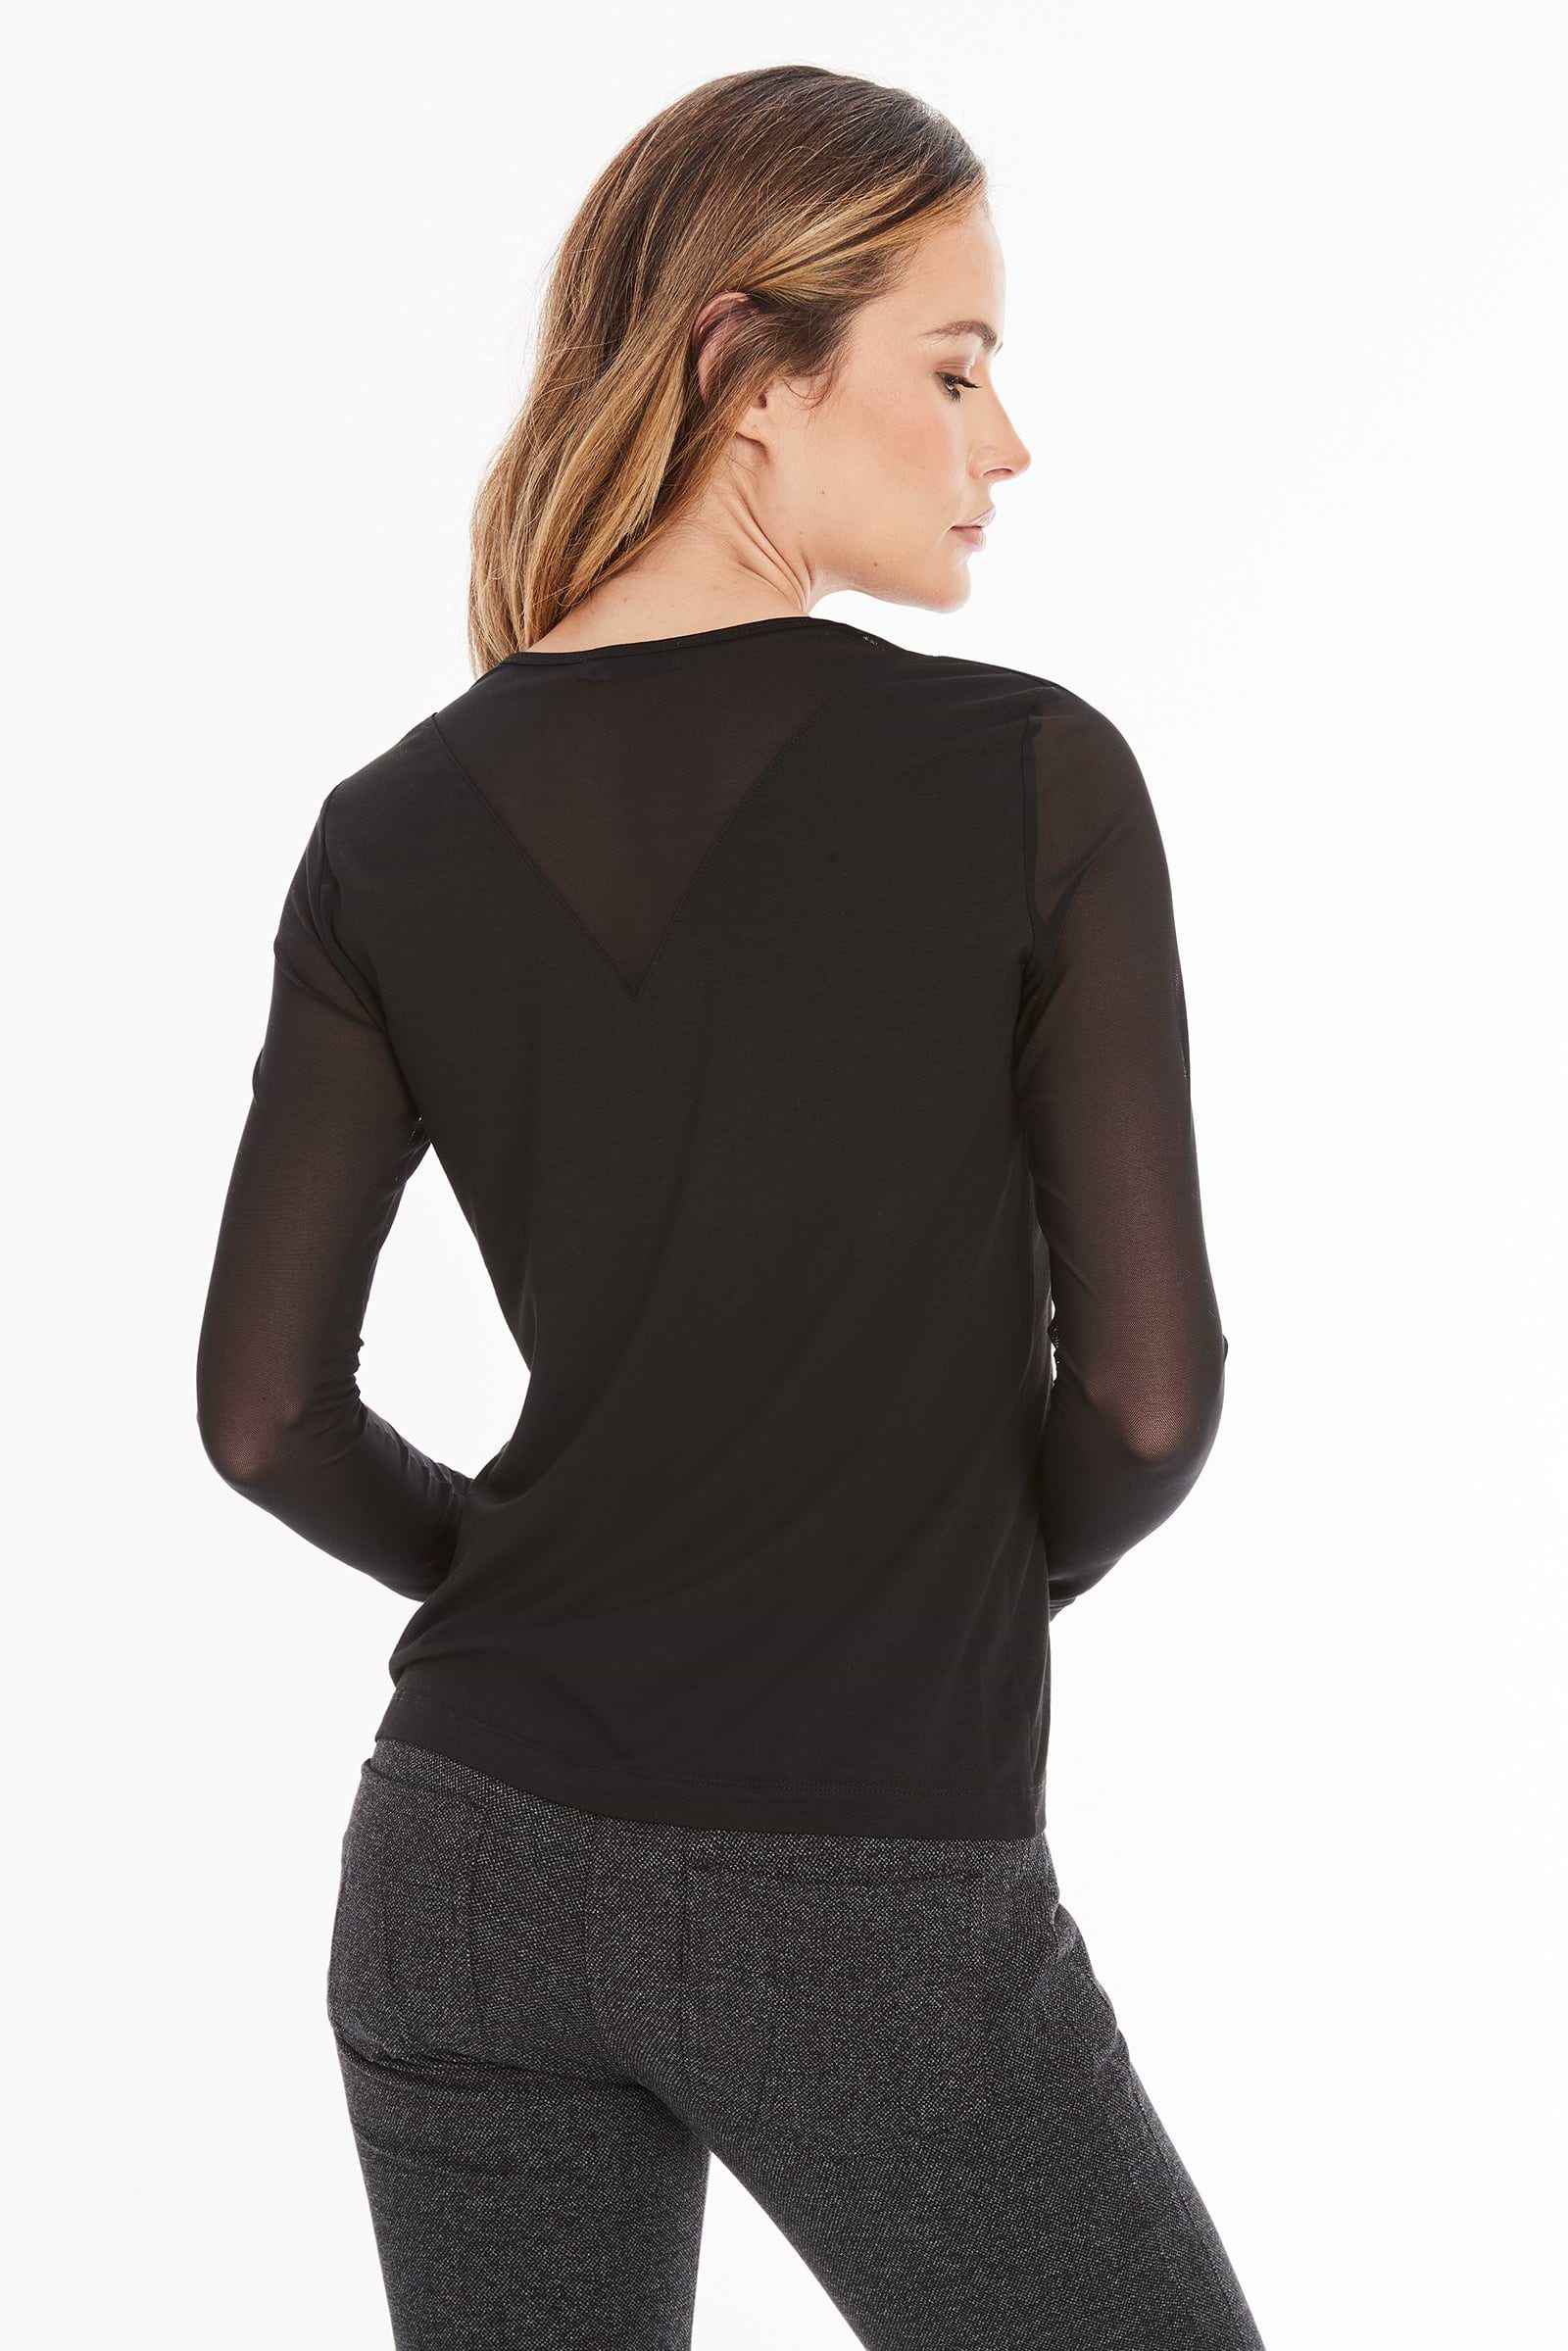 The Best Travel Top. Woman Showing the Back Profile of a Kim Mesh-Sleeve Top in Pima Modal in Black.